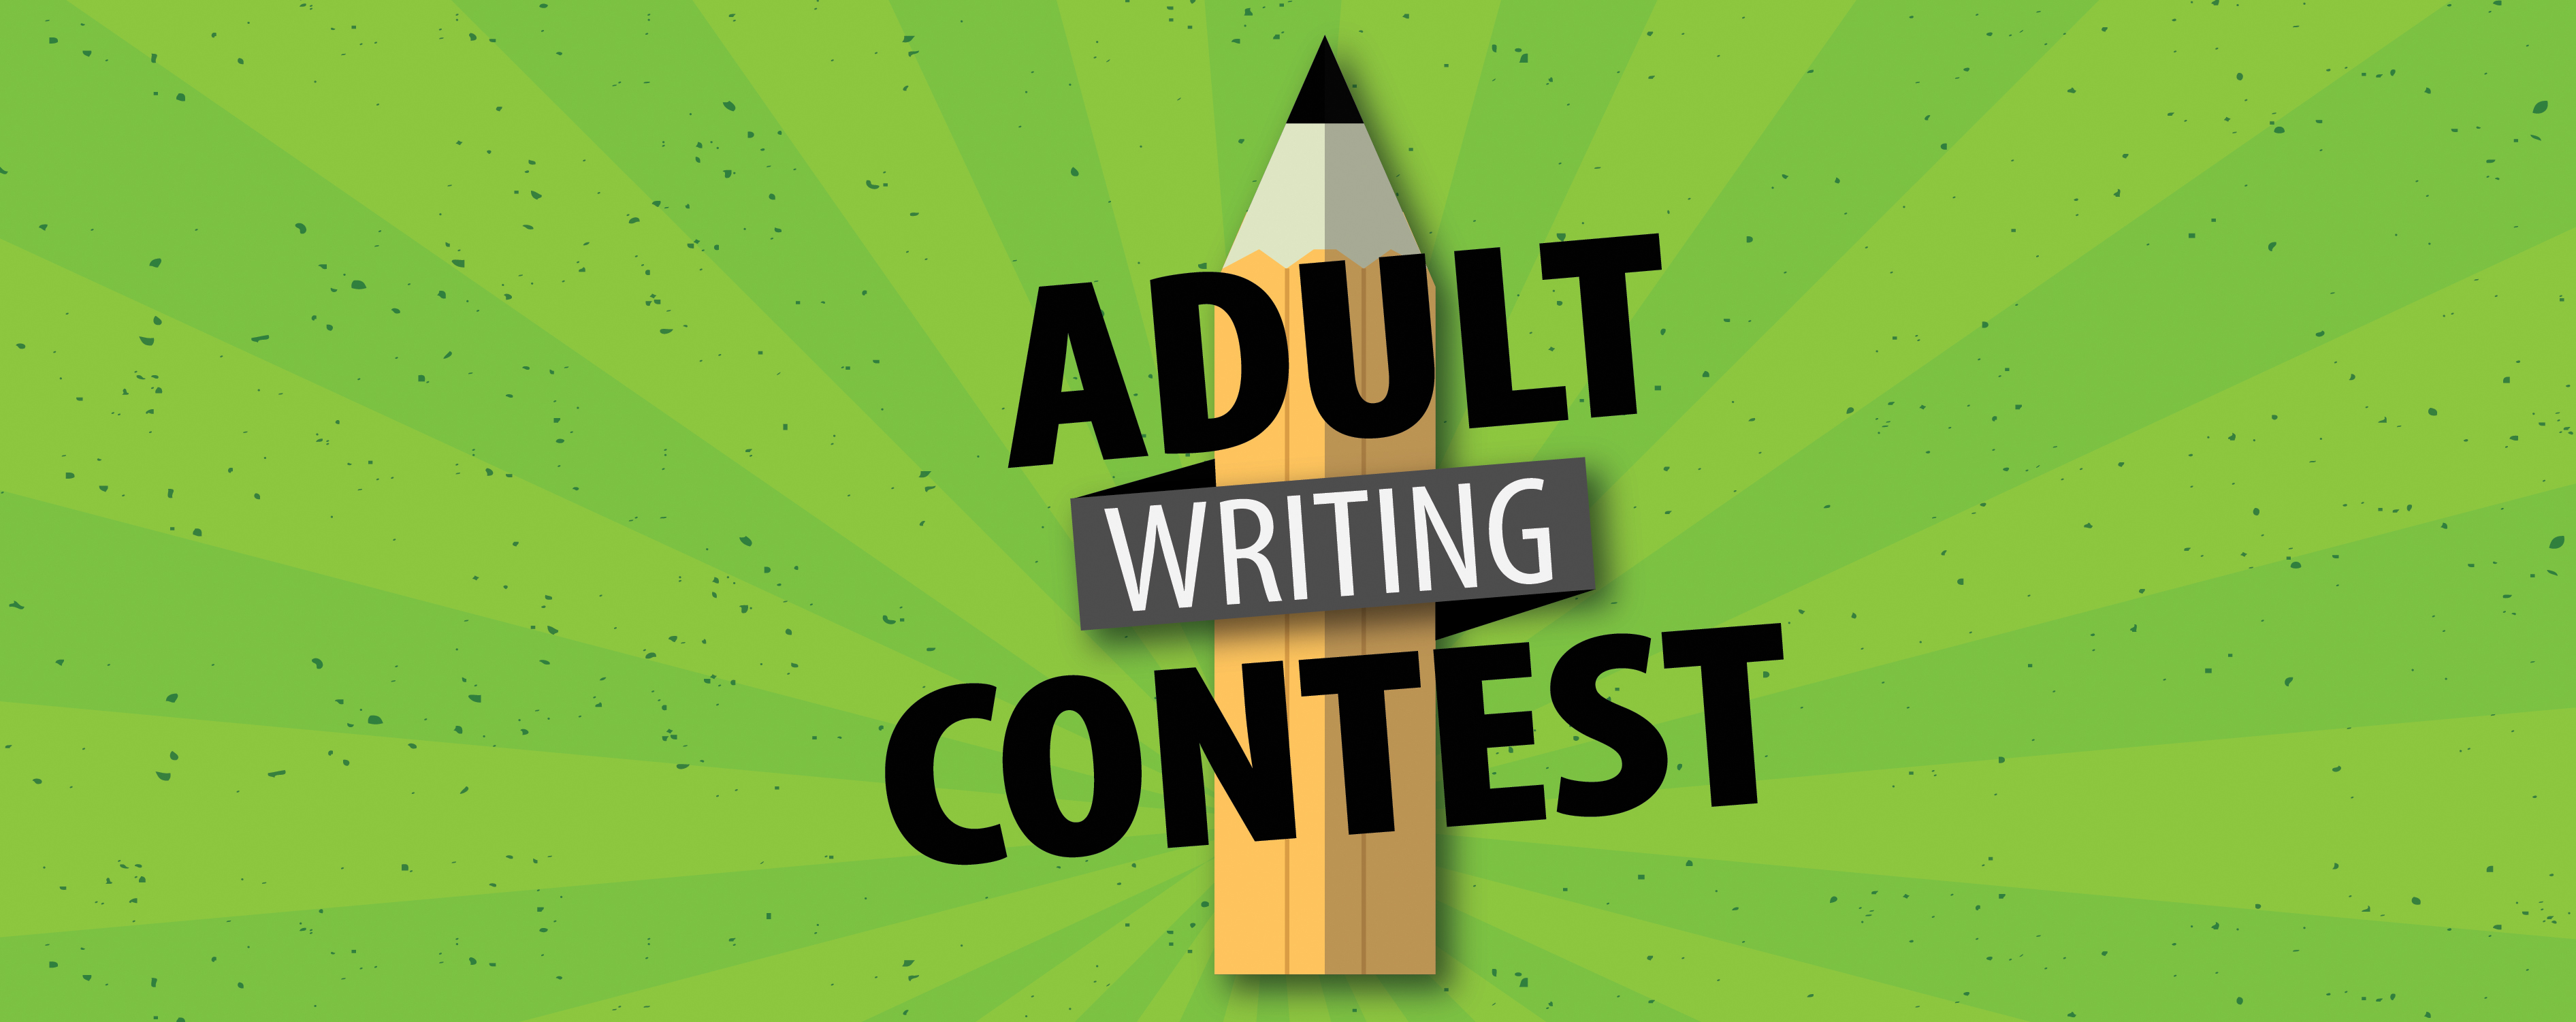 Adult Writing Contest Header